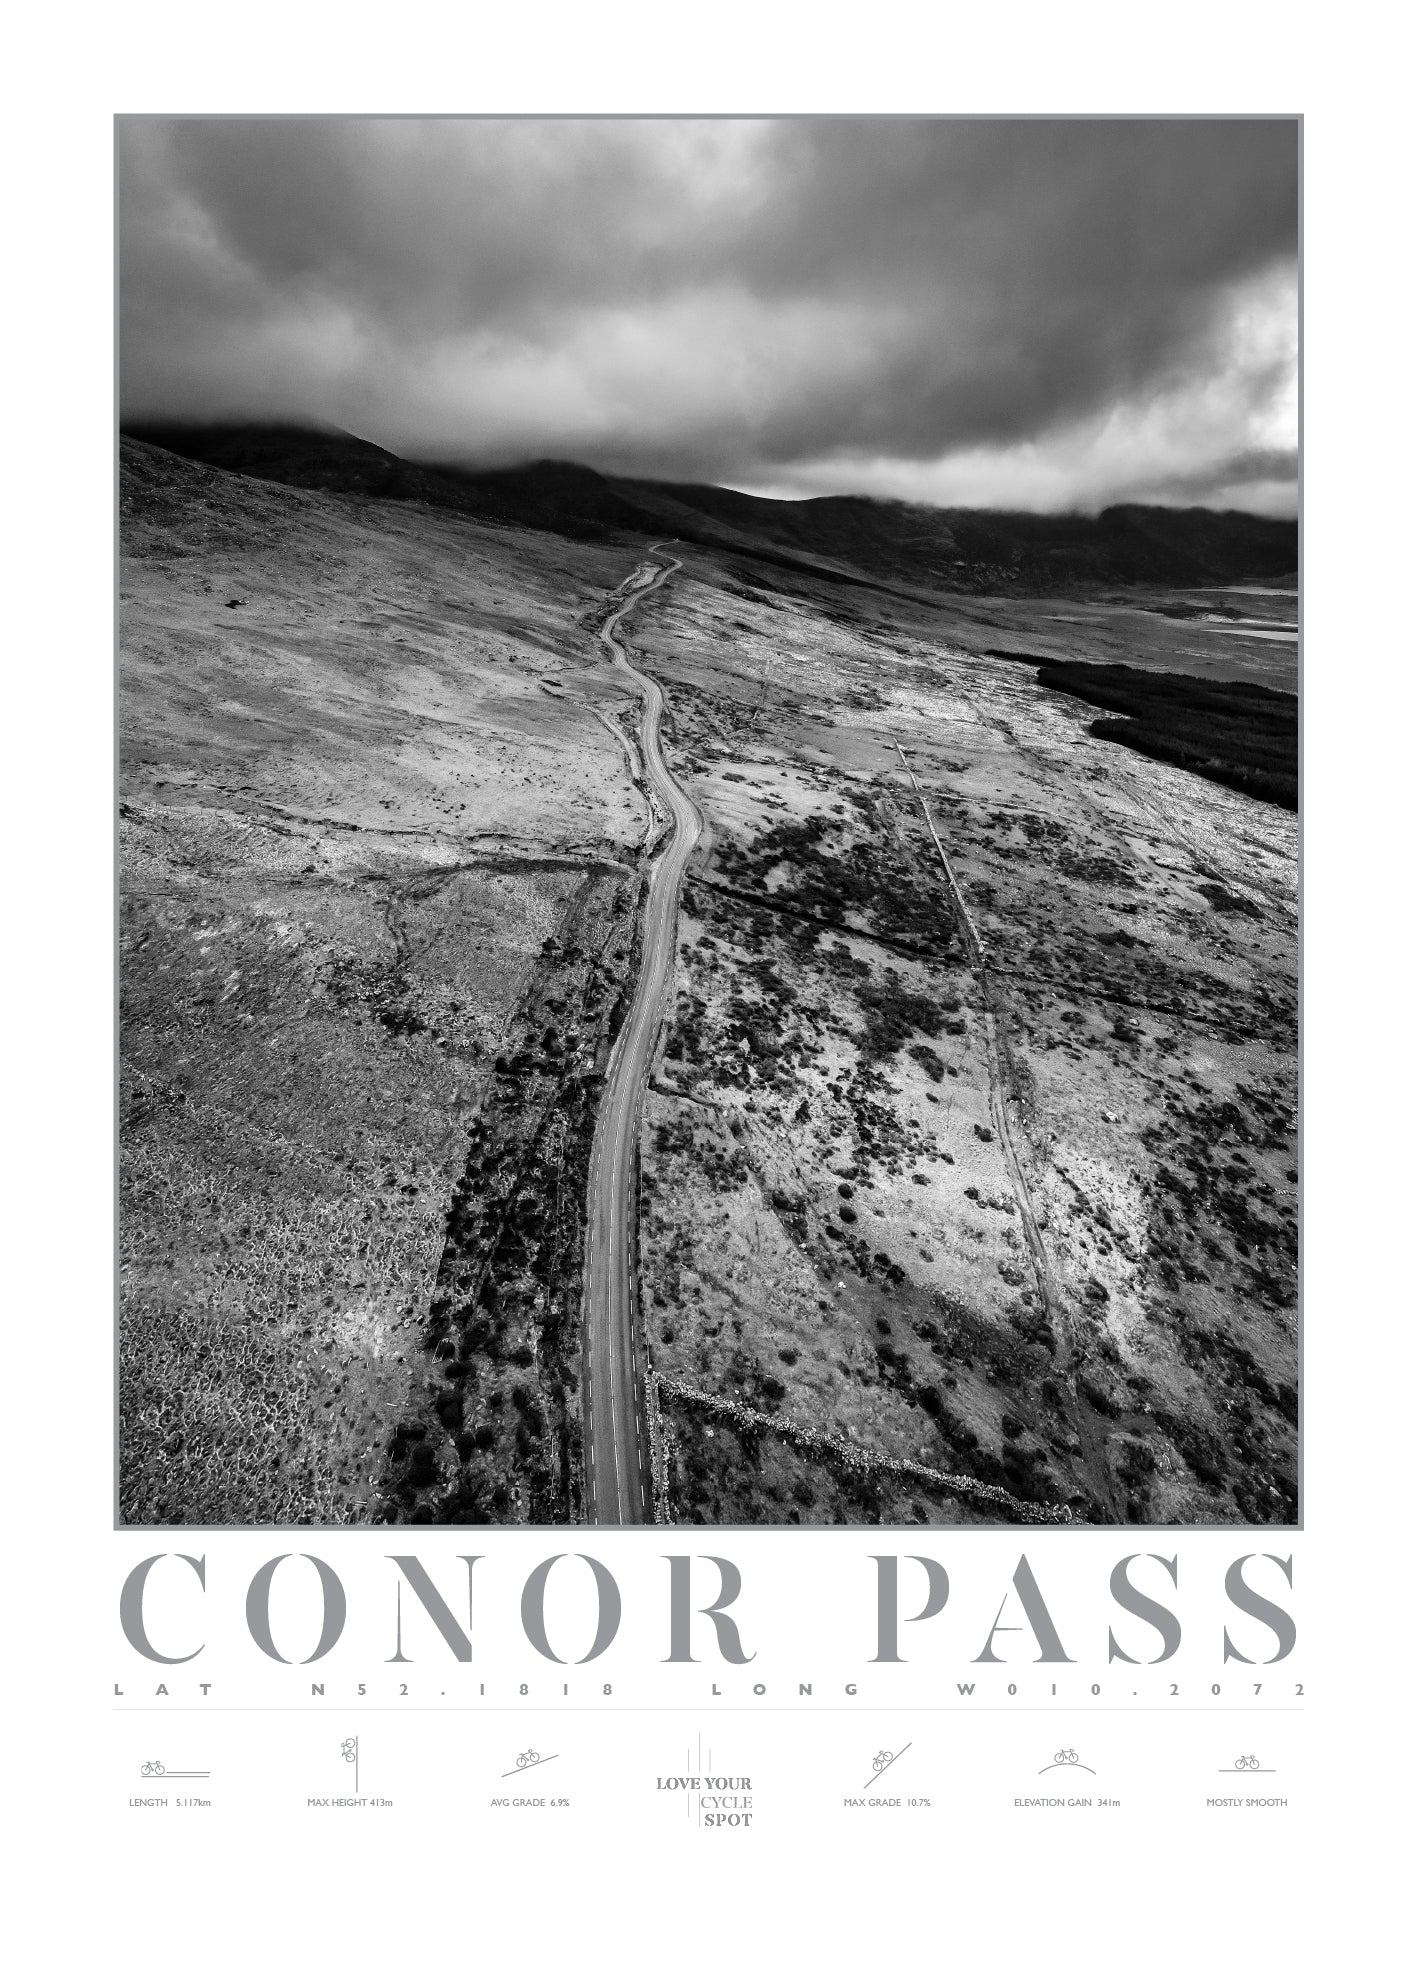 CONOR PASS CO KERRY